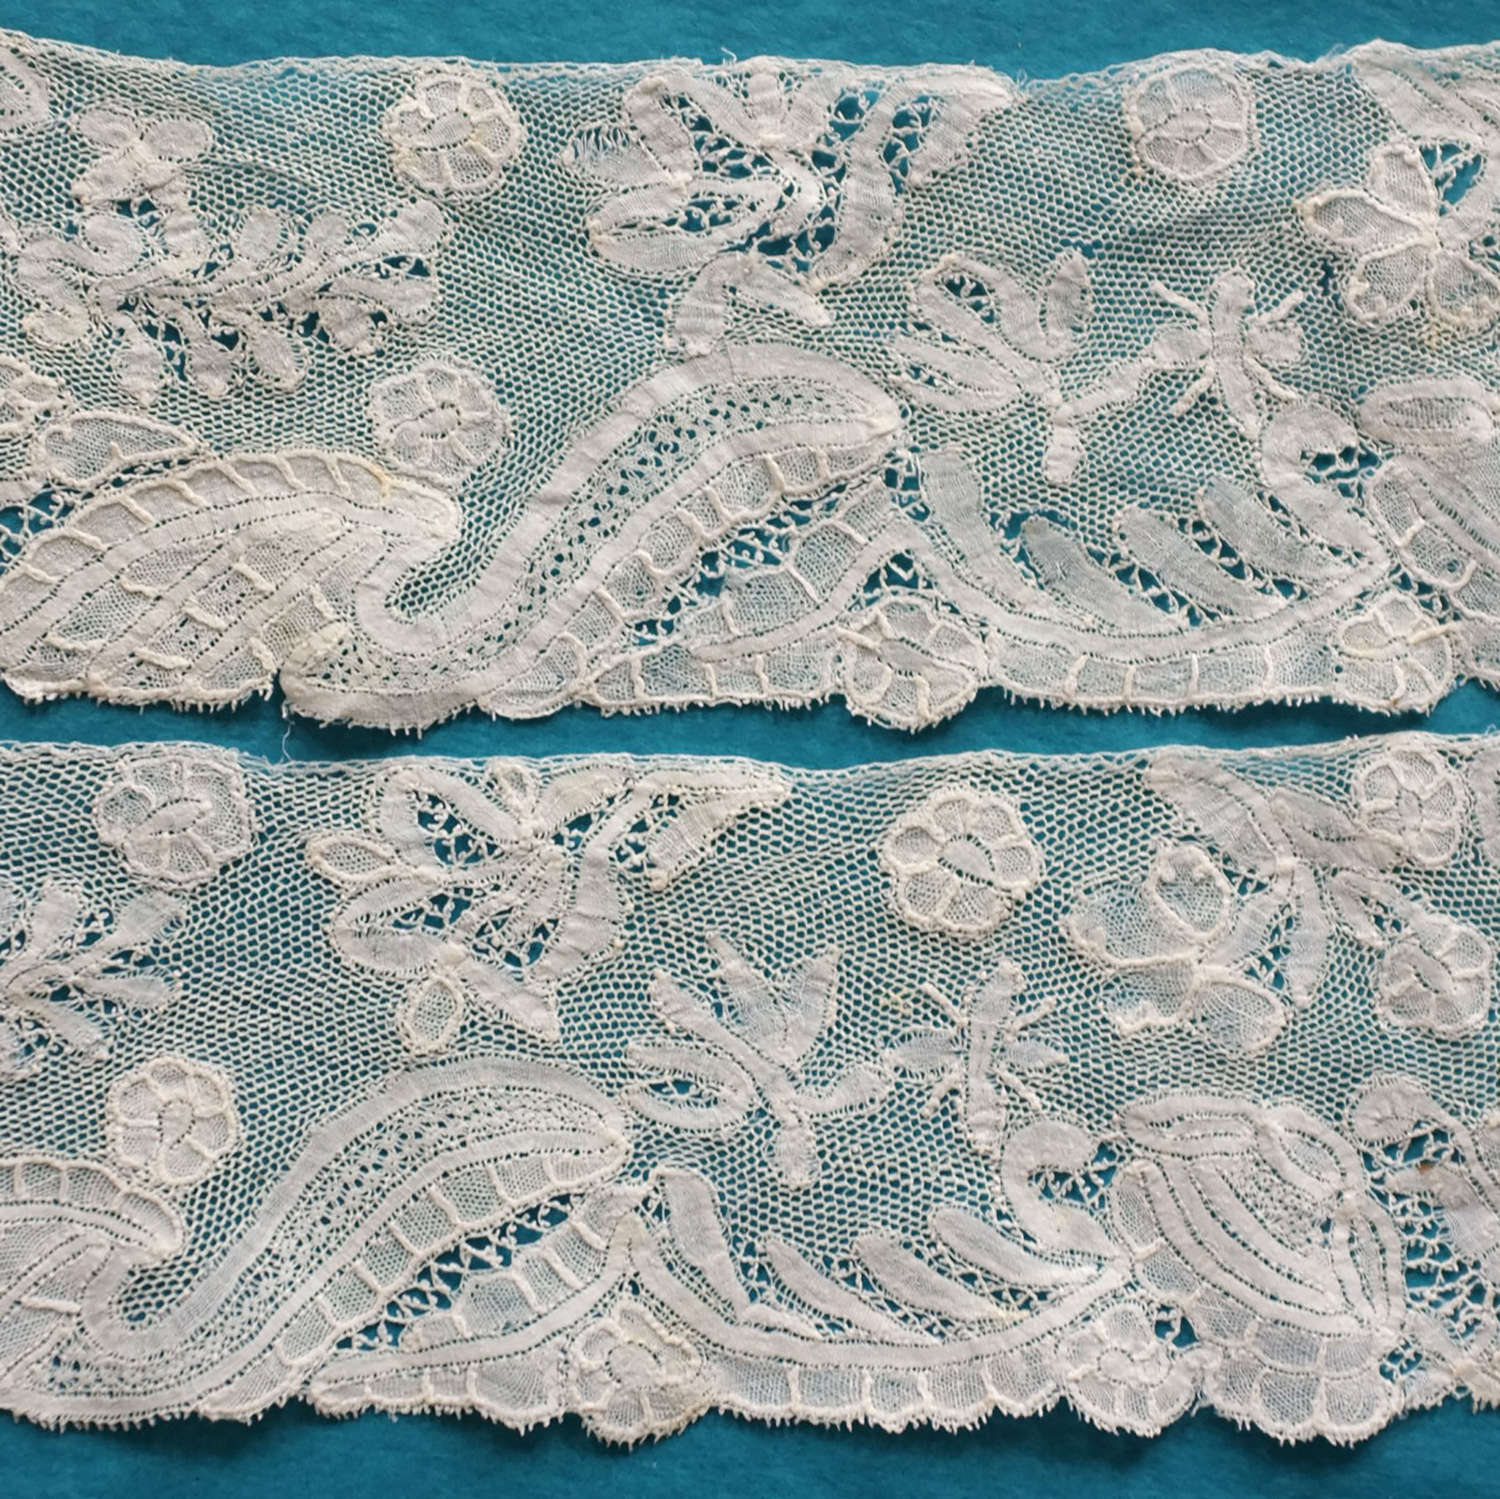 Antique 18th Century Brussels Bobbin Lace Border with Bees